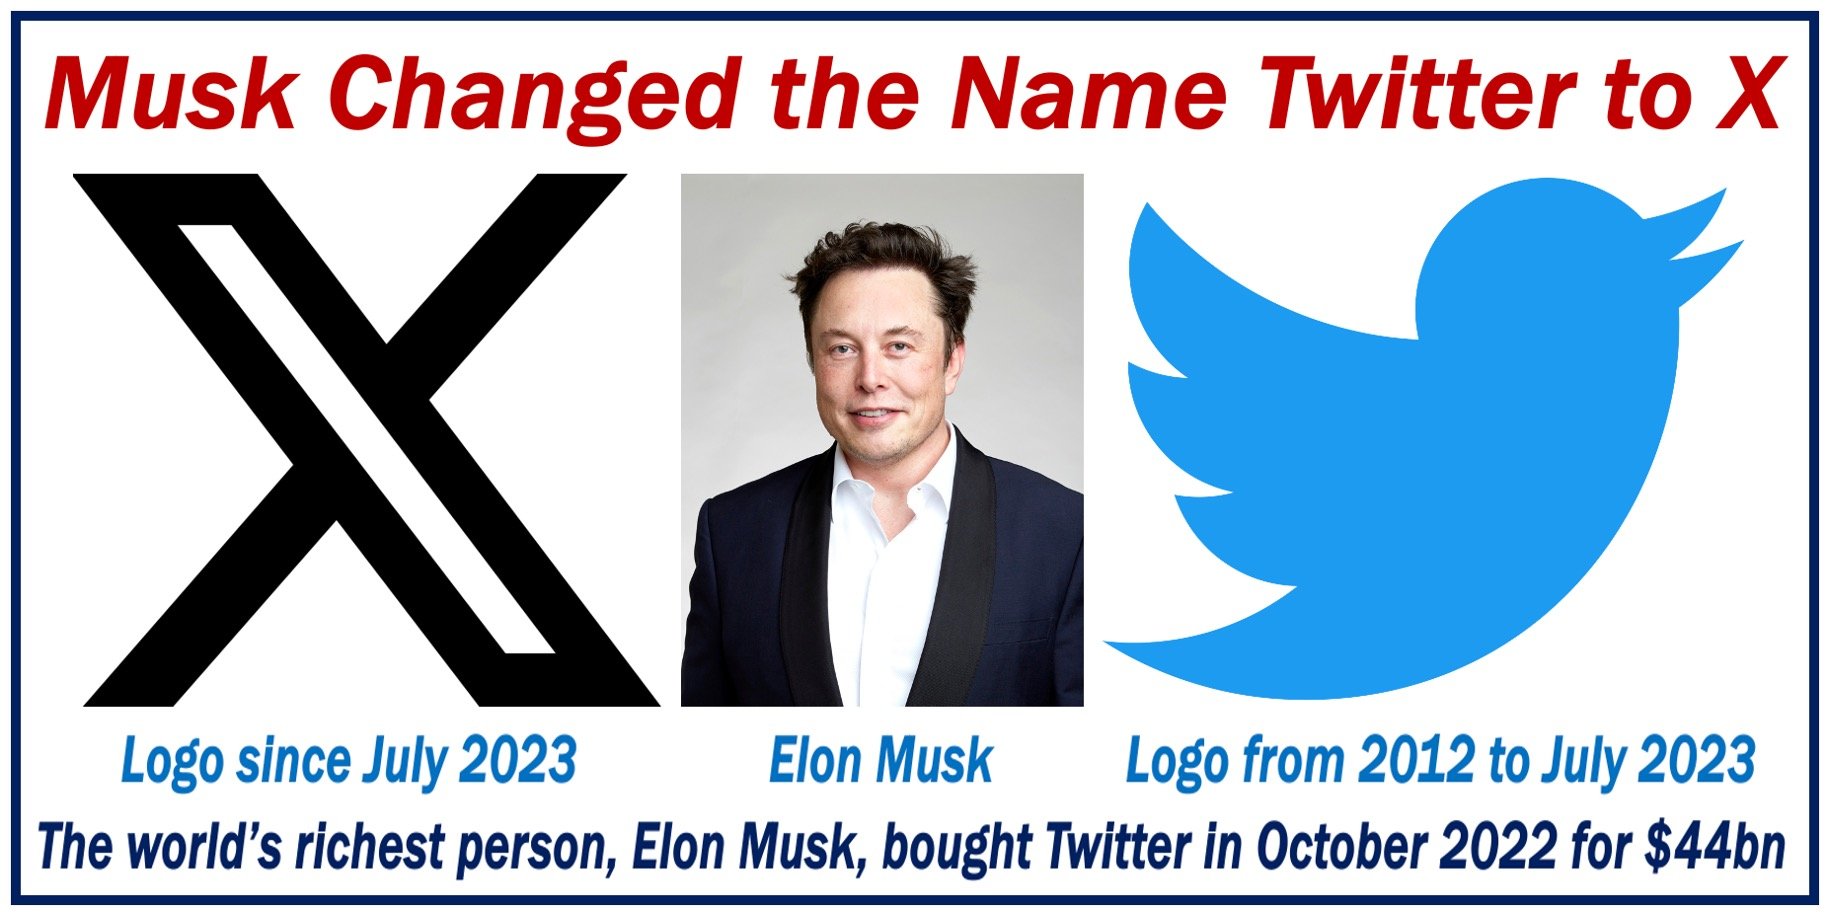 Image of Elon Musk, old twitter logo, and new X logo